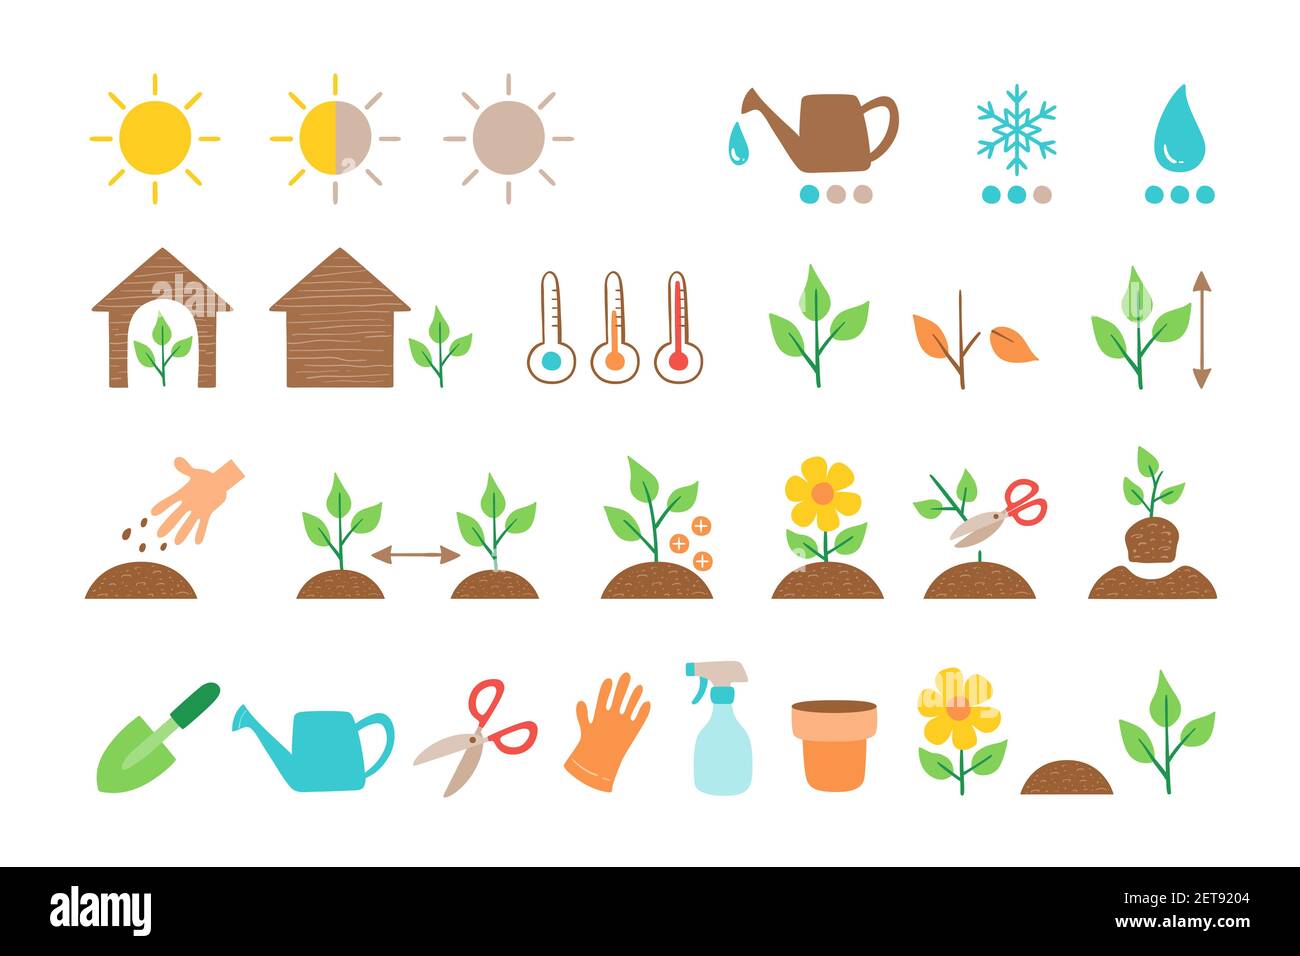 Plant icon set. Collection of icons for descripting the characteristics and needs of each type of plant. Colorful vector icons isolated on white backg Stock Vector